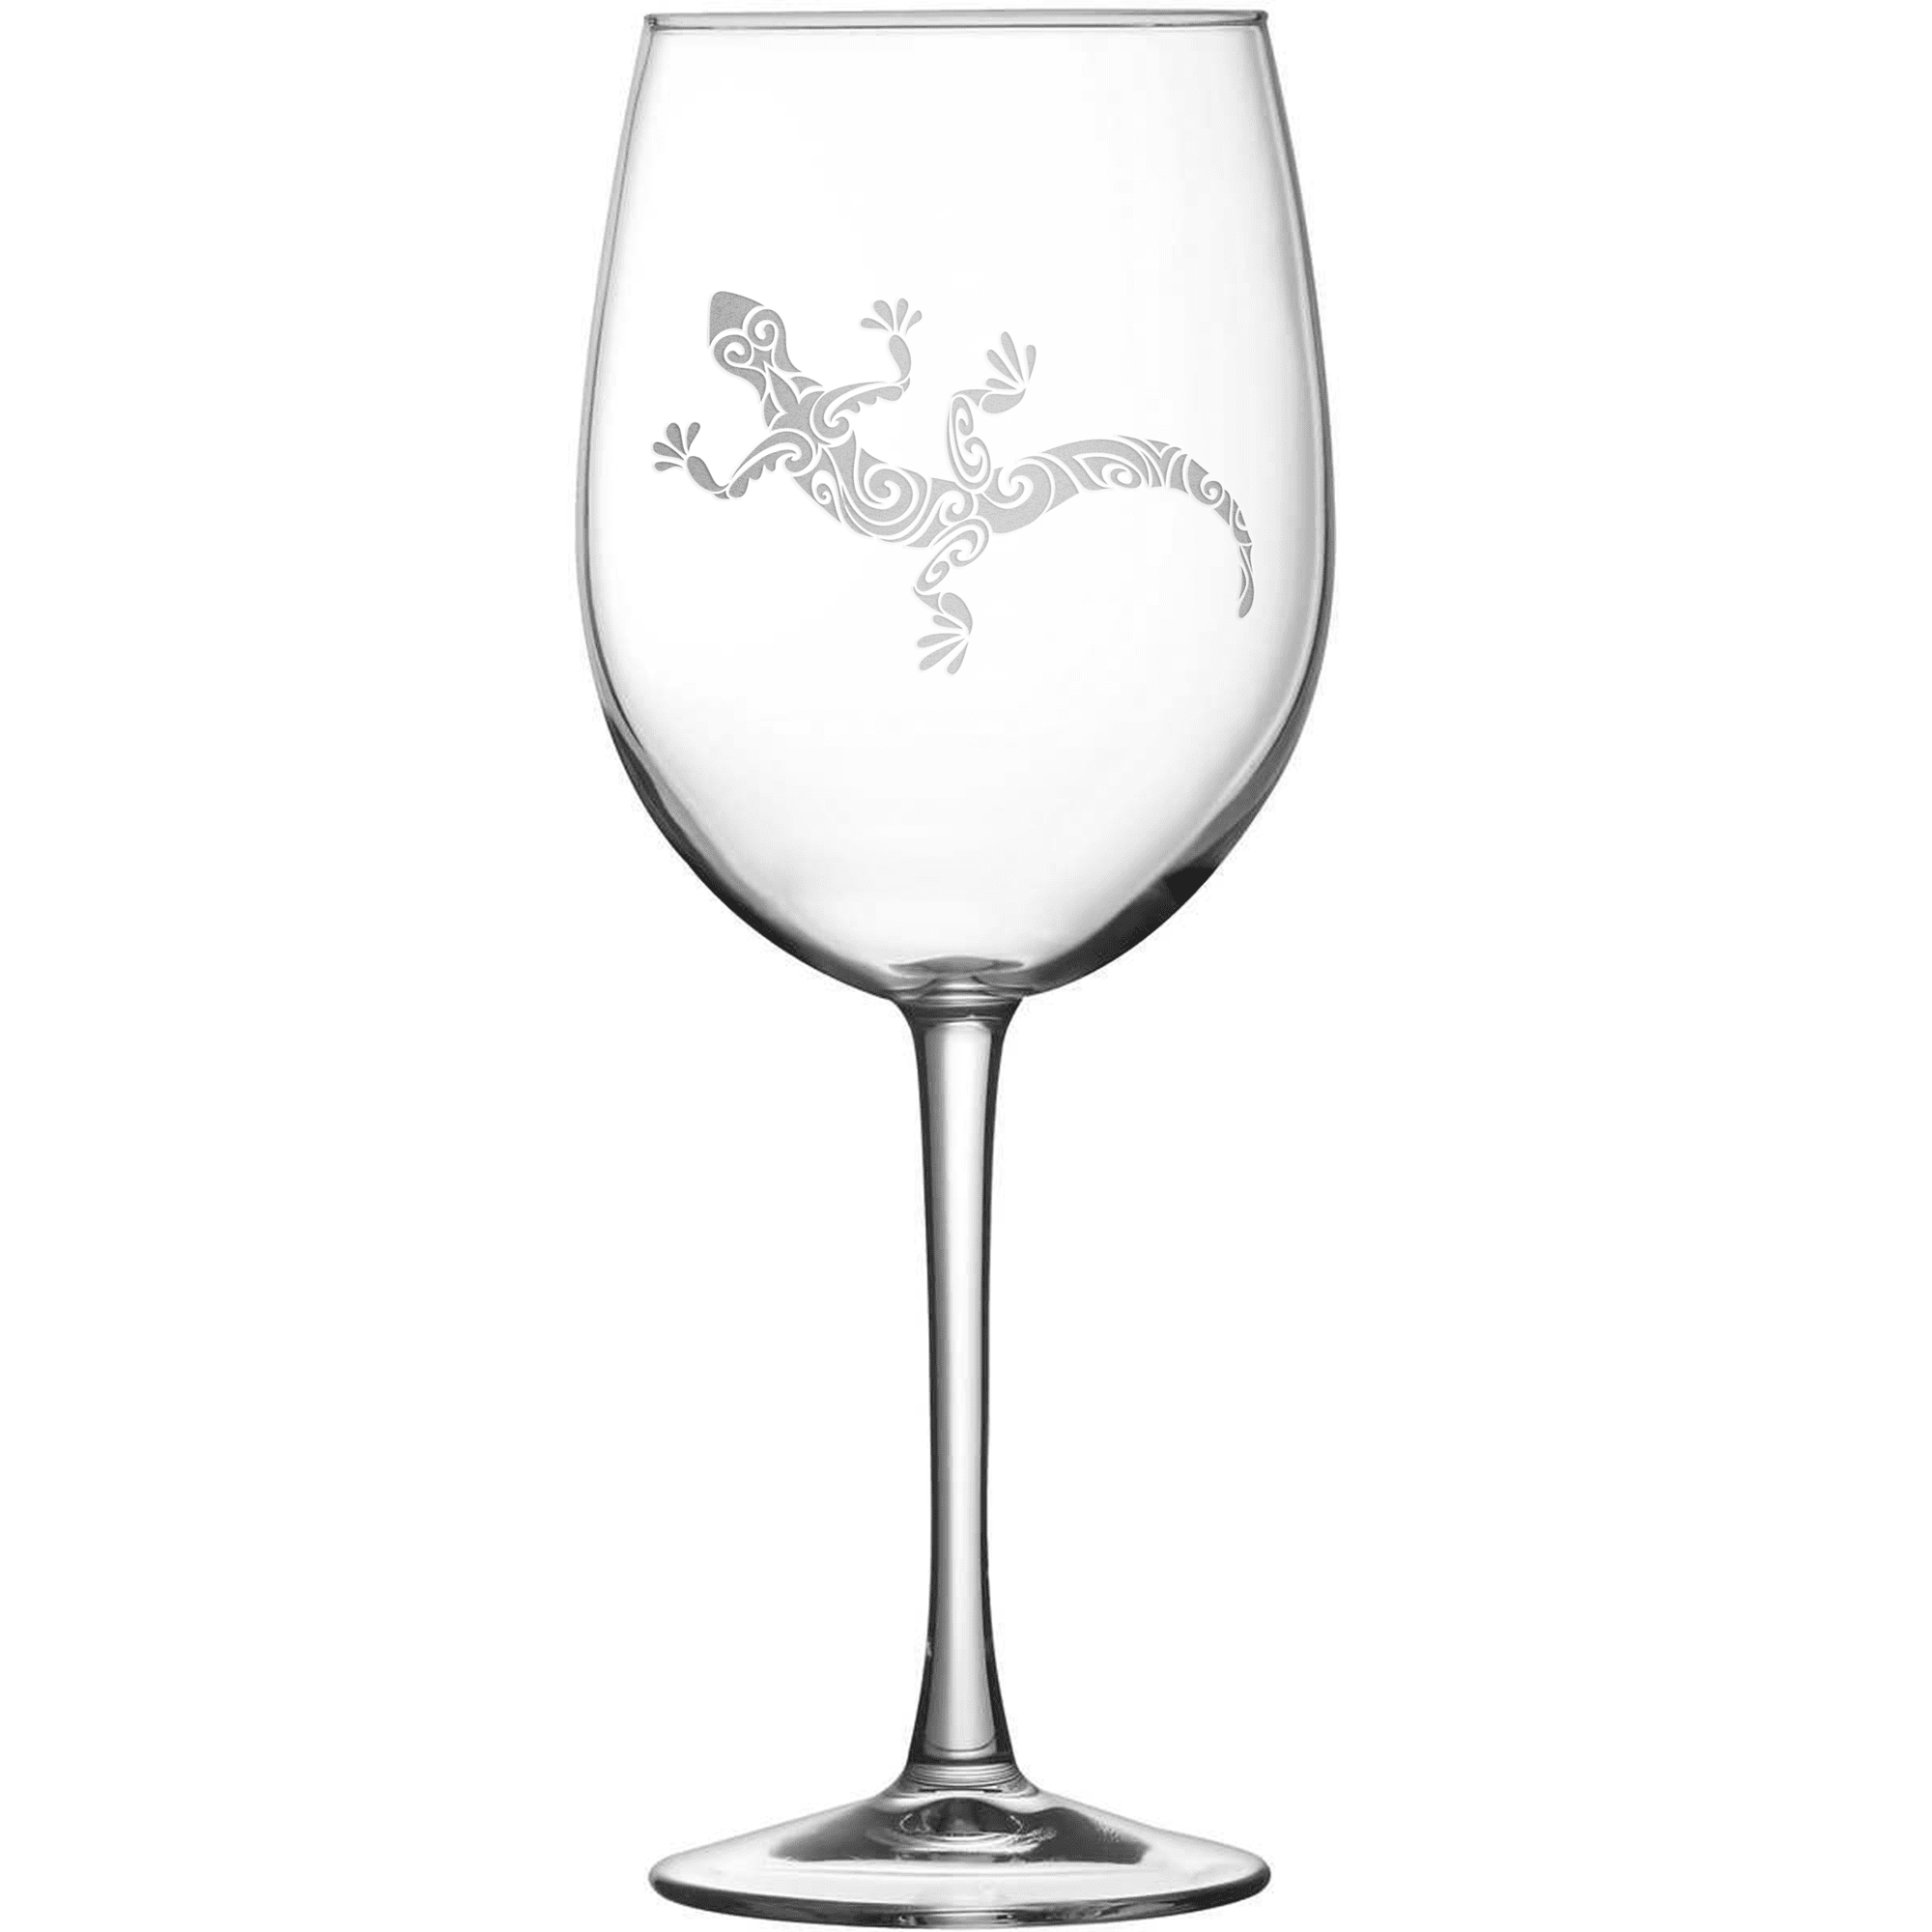 Tulip Wine Glass with Gecko Design, Hand Etched by Integrity Bottles